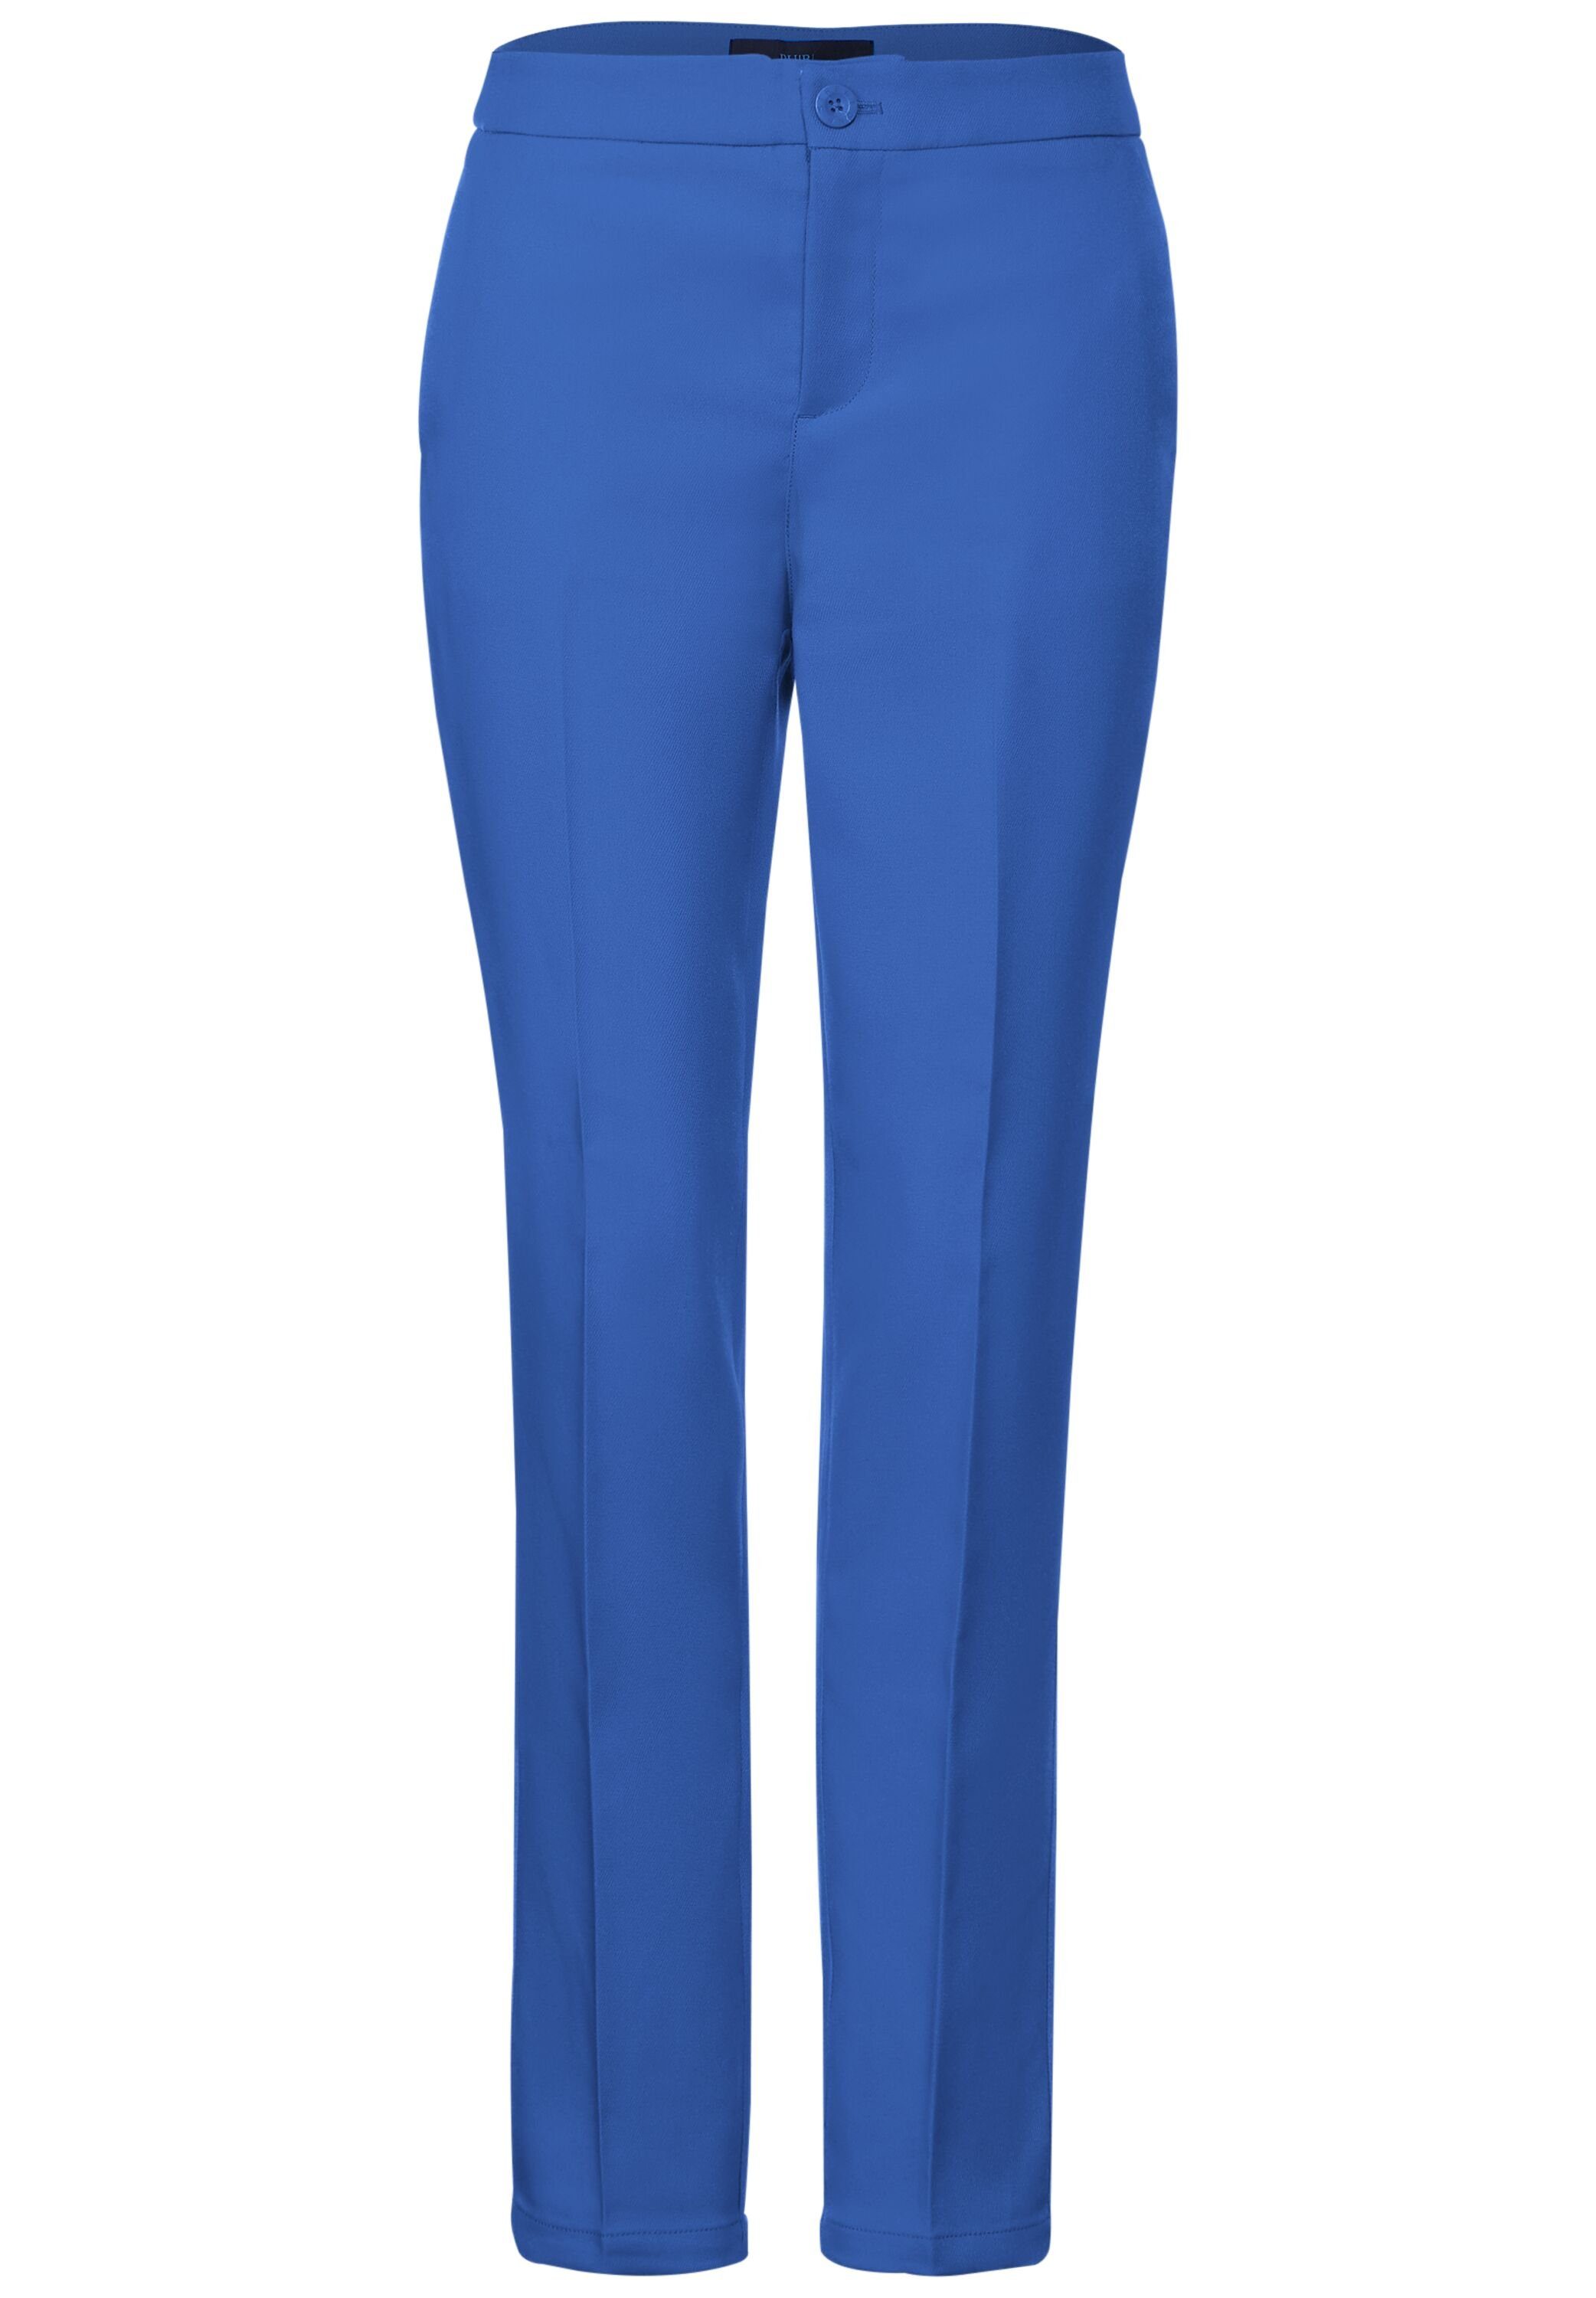 Pants Stoffhose Solid gentle STREET Fit ONE intense fresh blue Loose im Twill